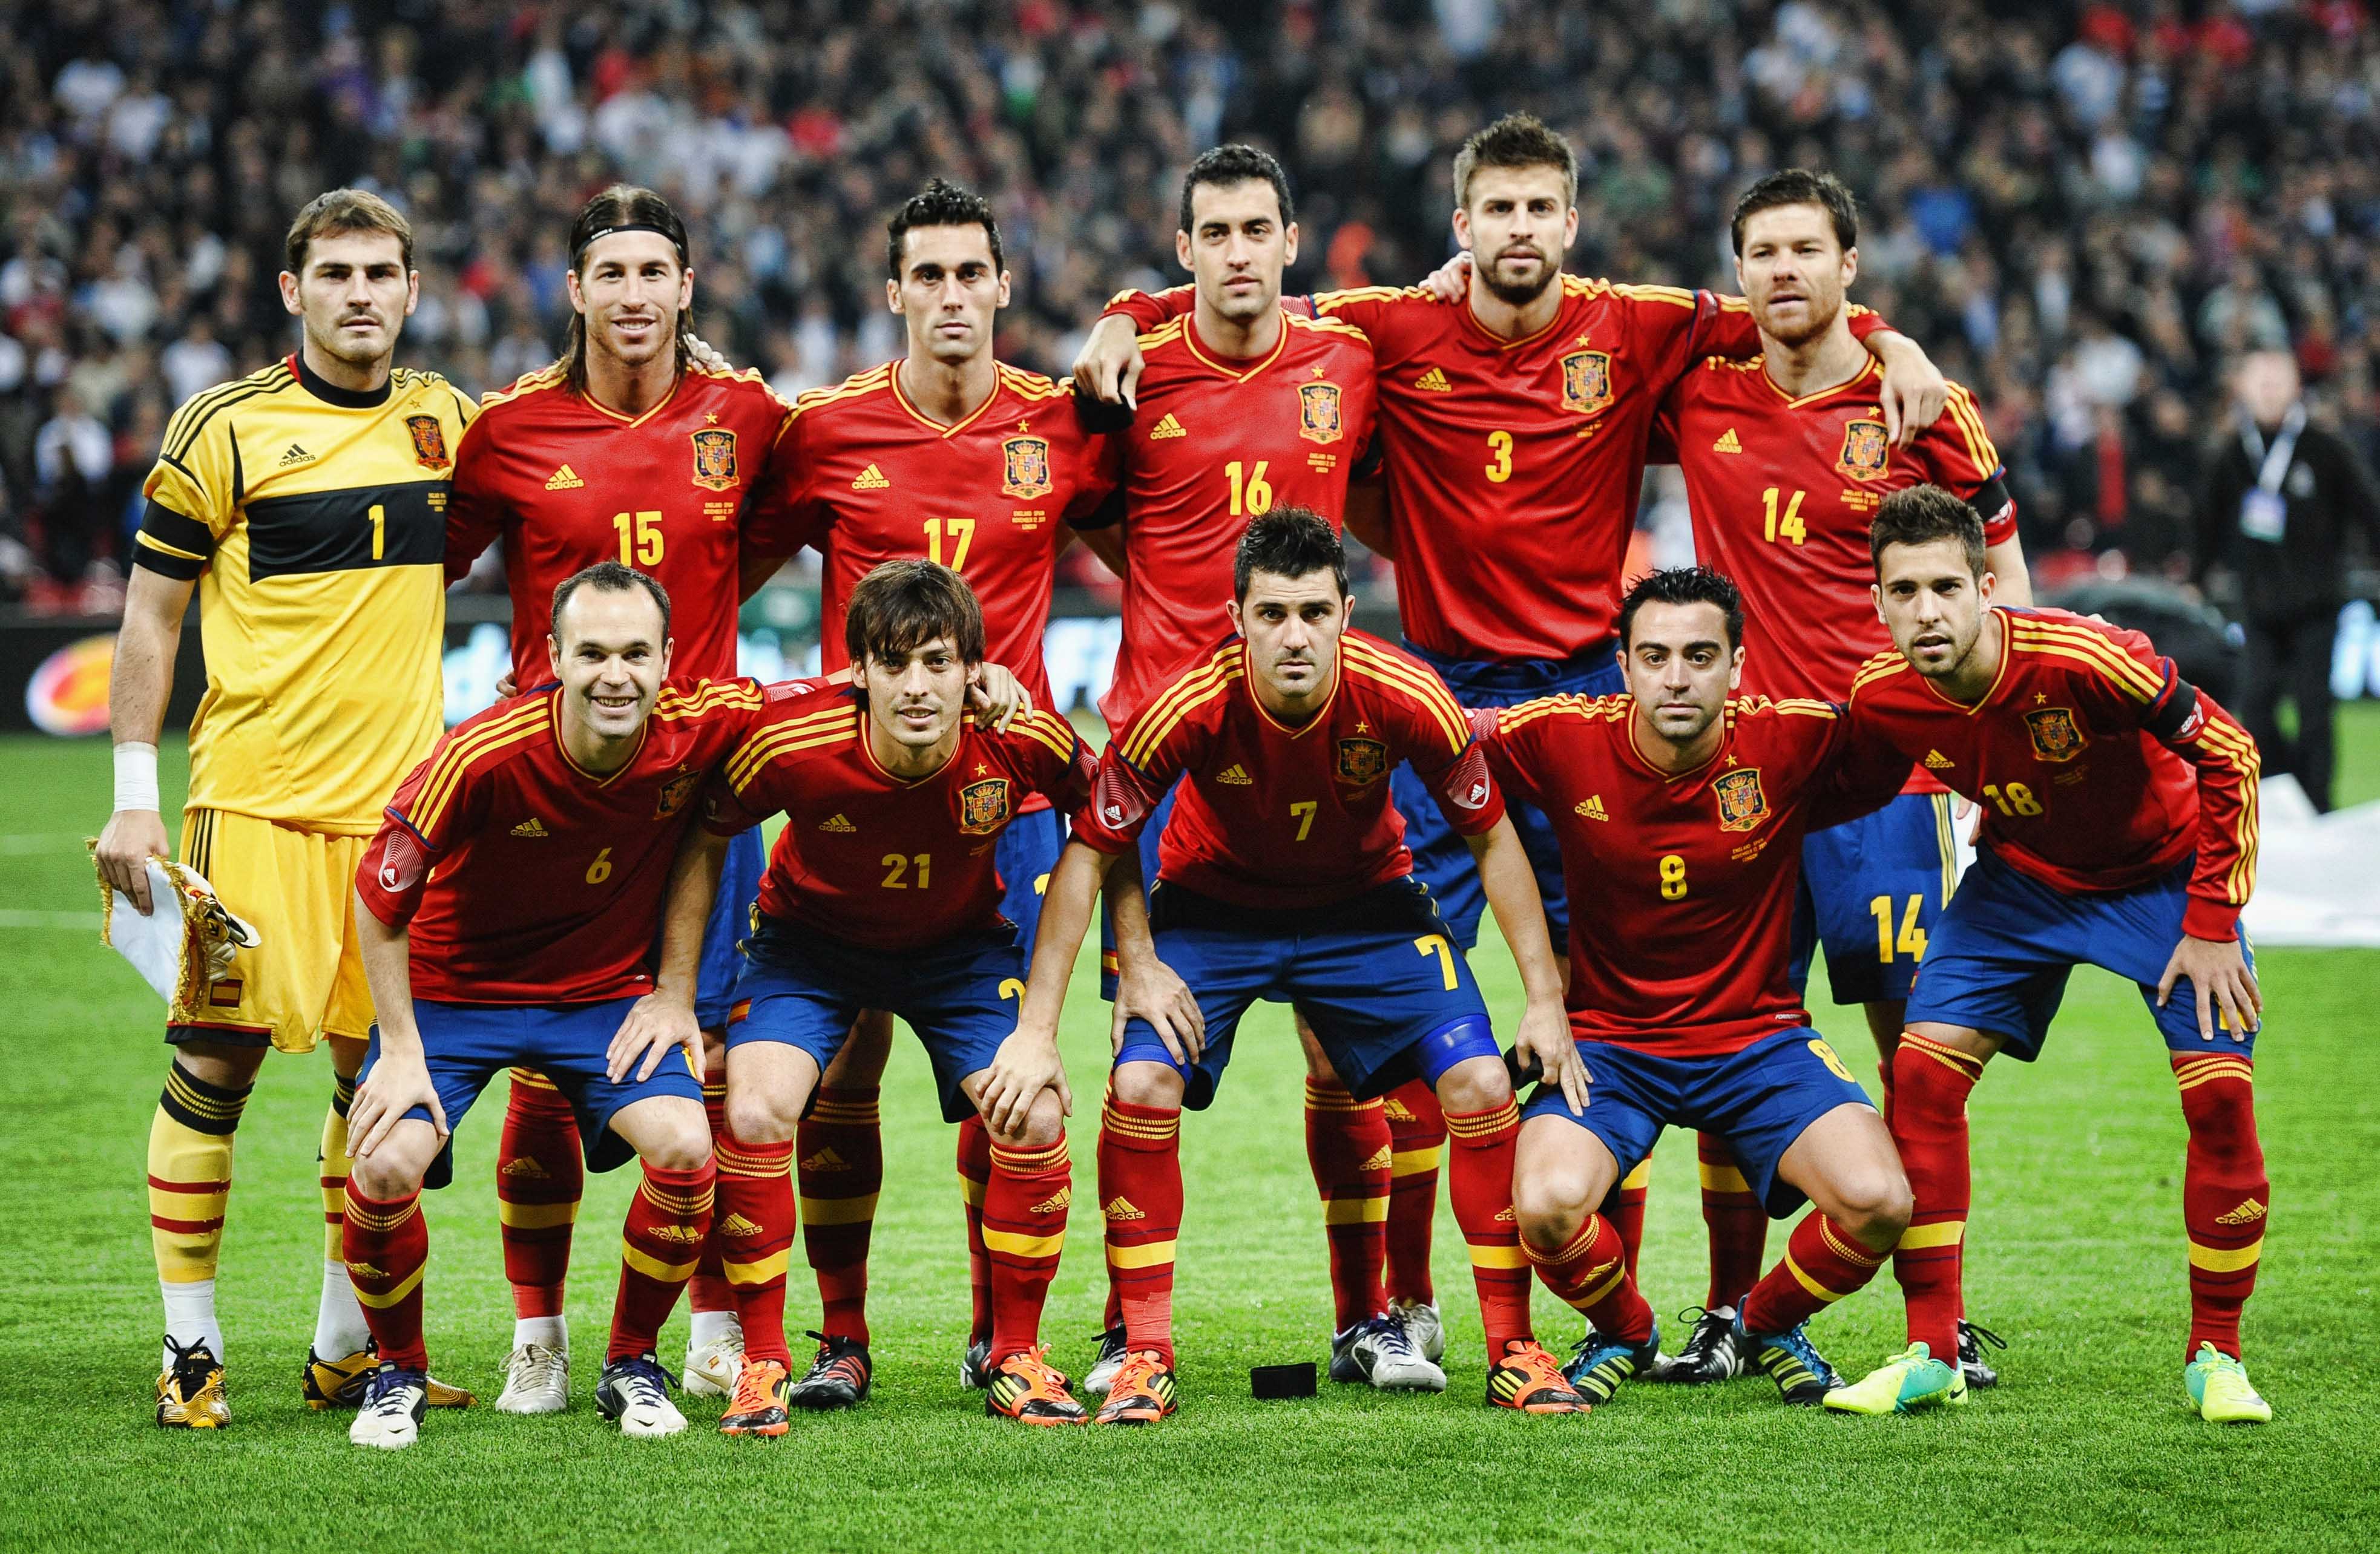 Spain national football team 4k Ultra HD Wallpaper and Background